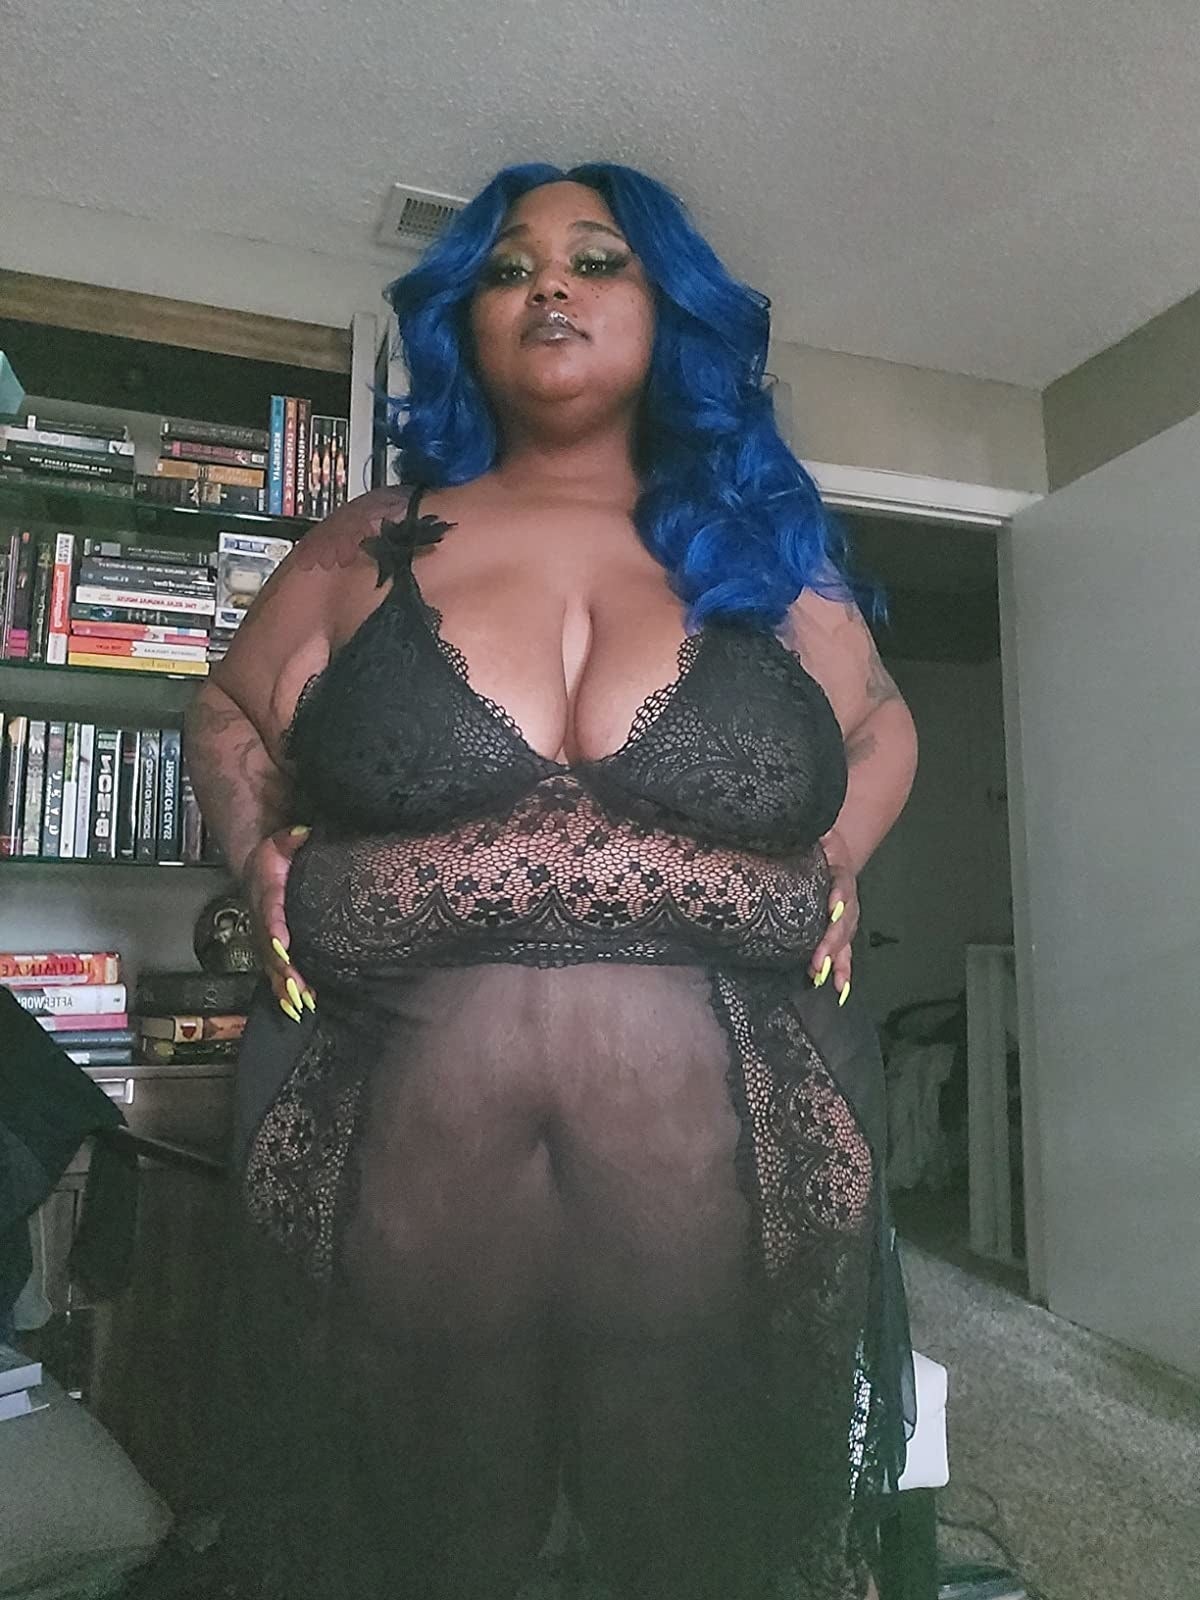 david hardy recommends bbw see through lingerie pic